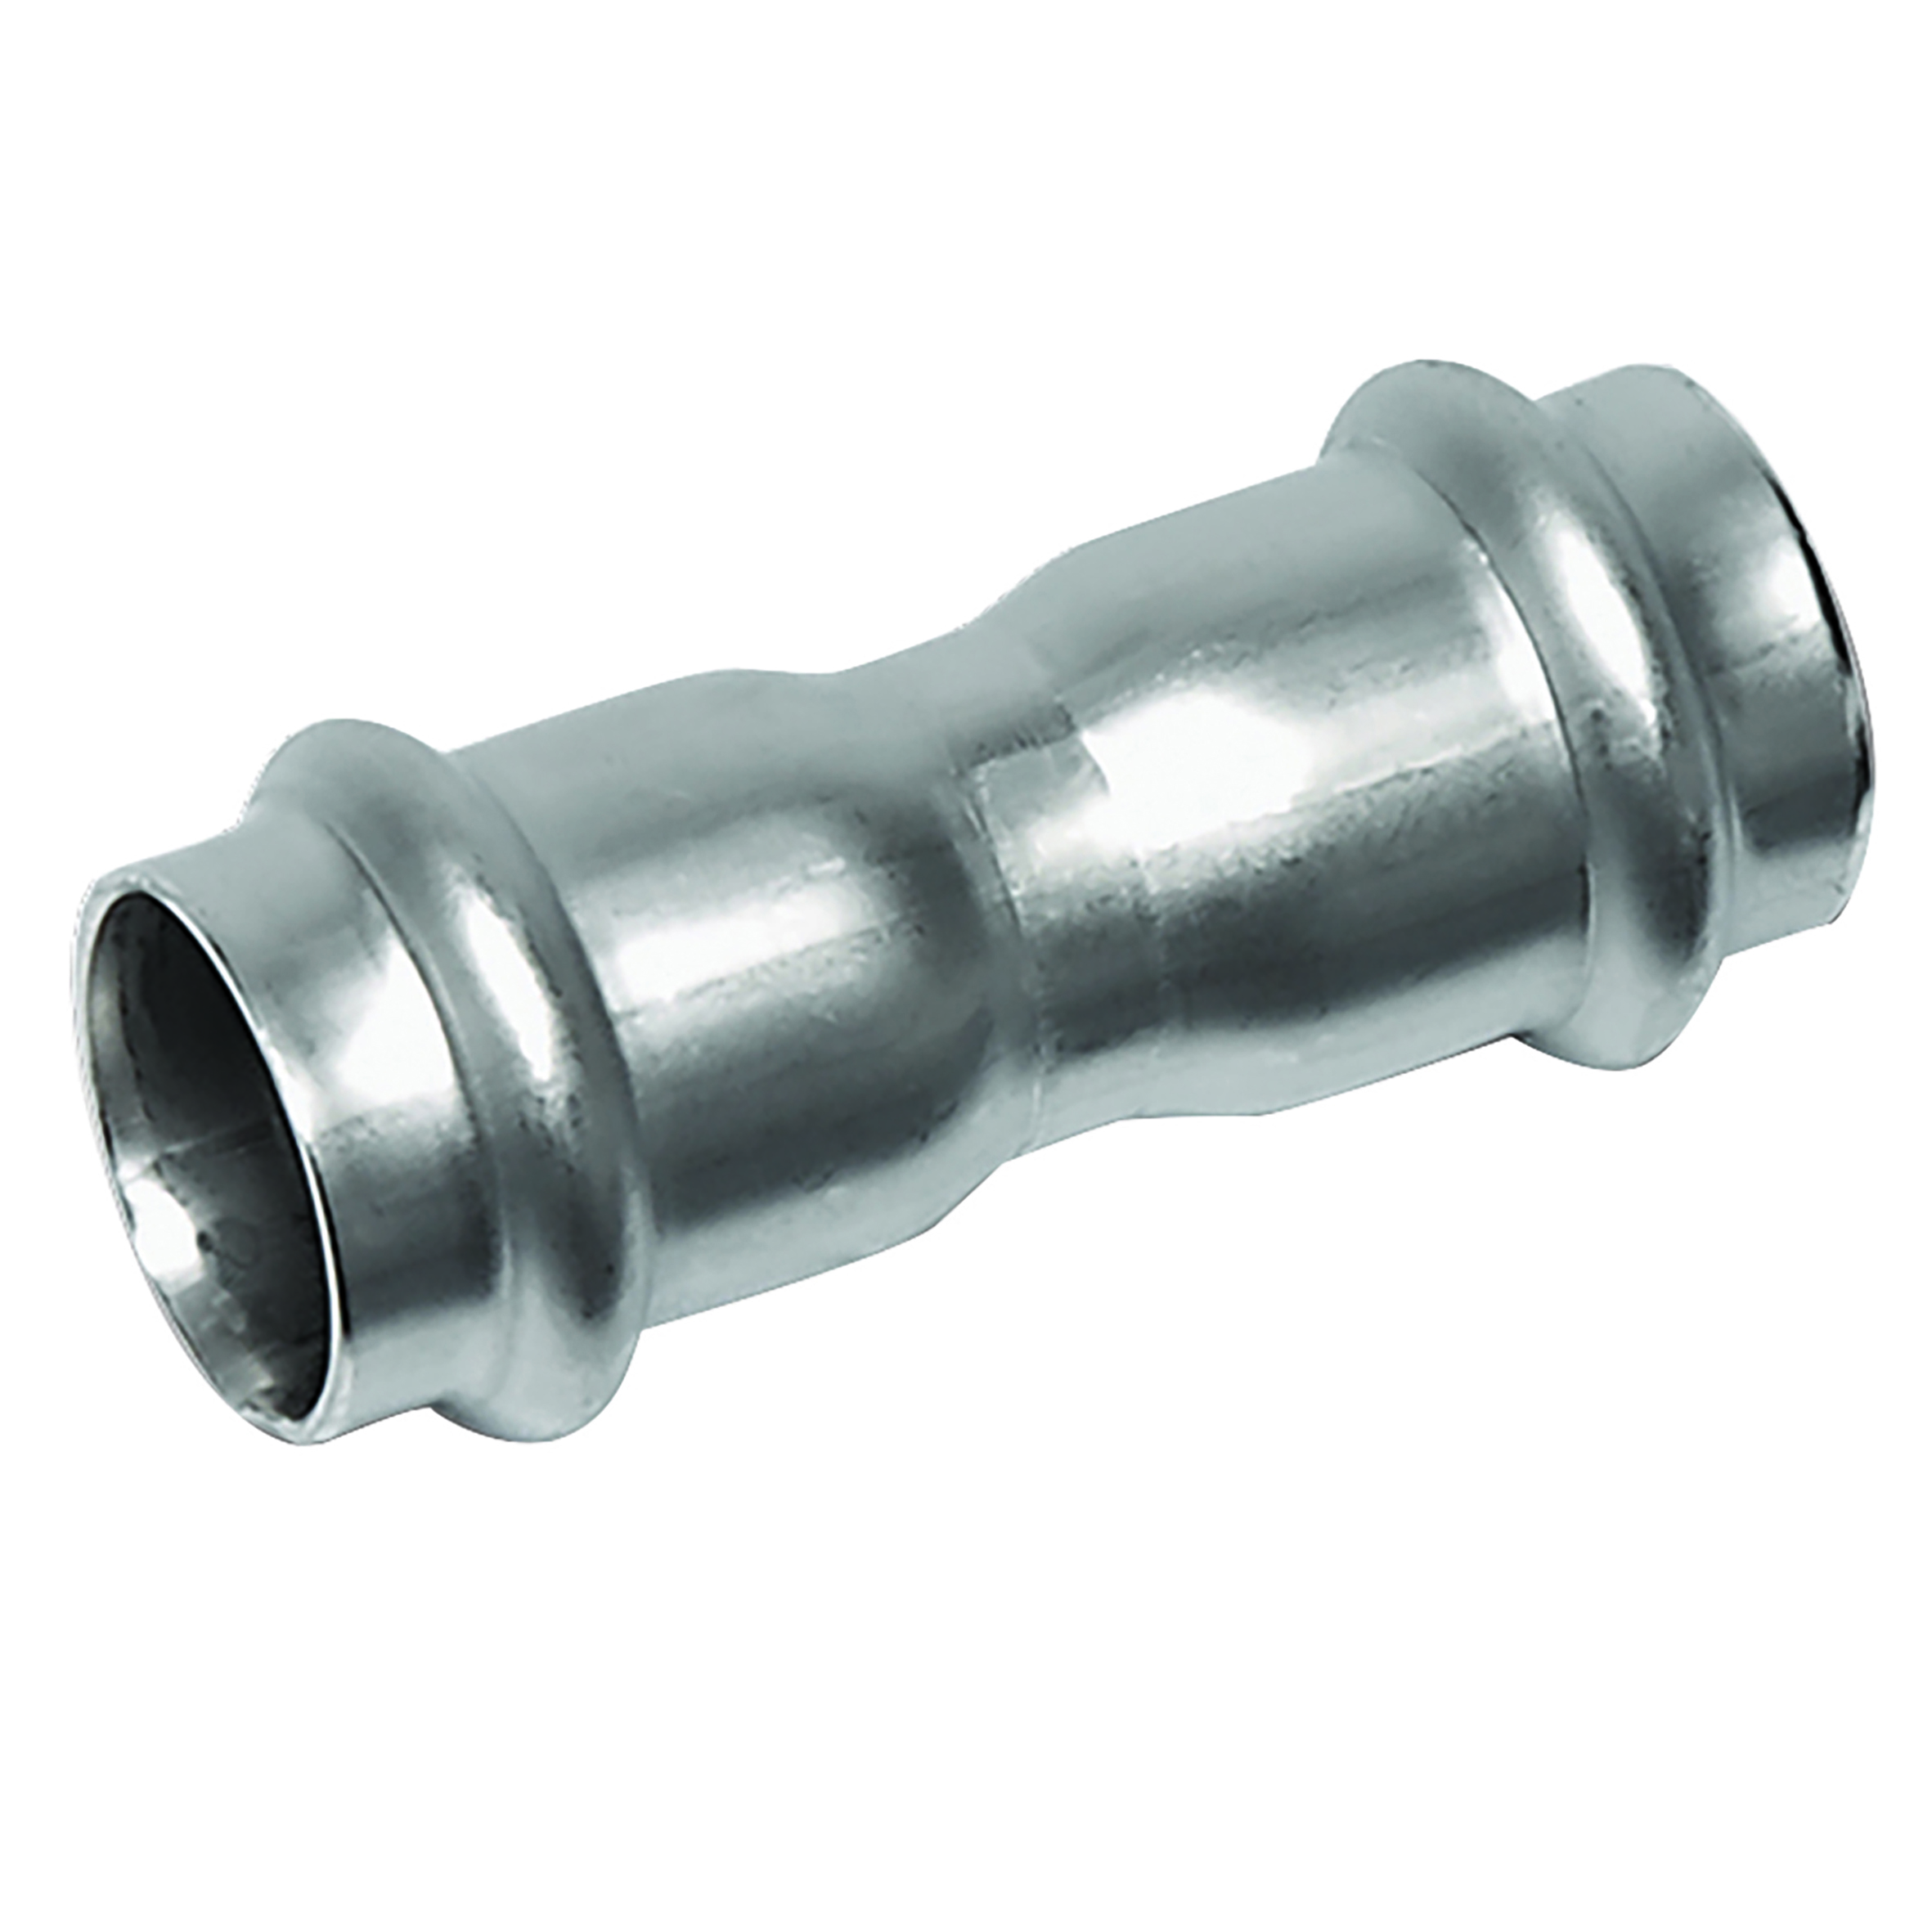 22MM S9000 STRAIGHTAIGHT COUPLING